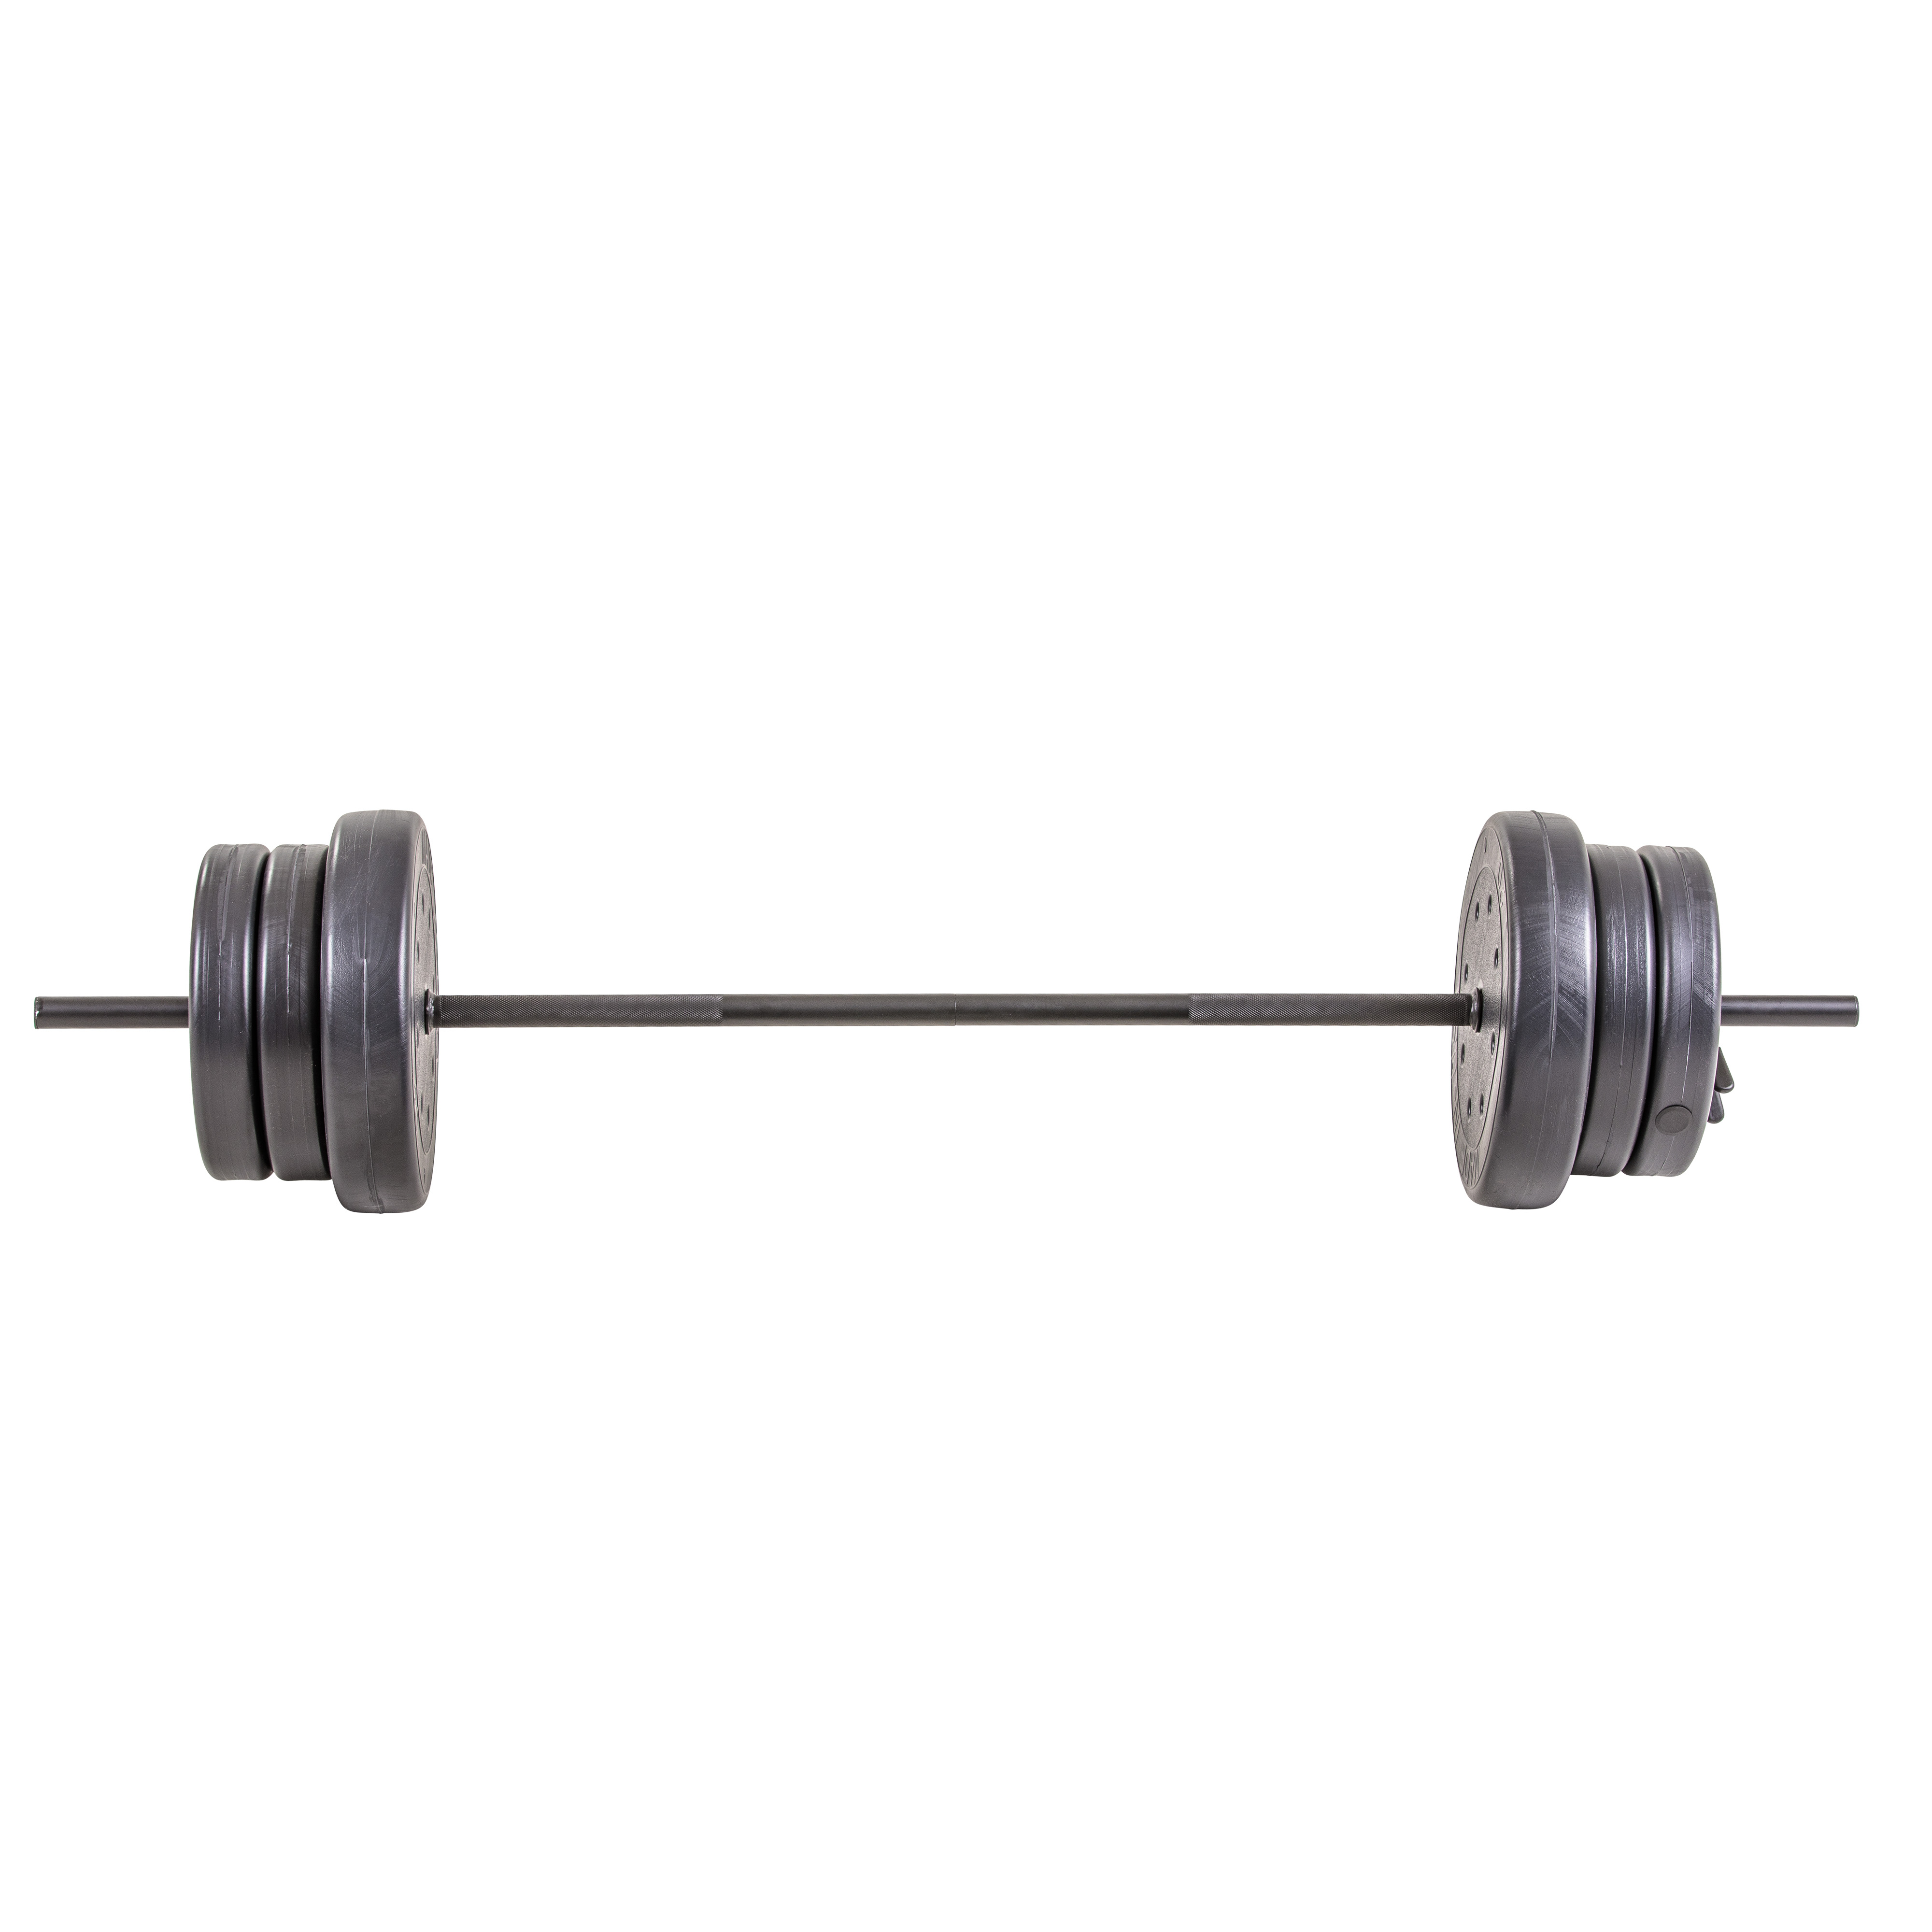 US Weight 55 lb. Barbell Weight Set with 3-Piece Threaded Barbell Bar, Two Locking Spring Clips - image 1 of 6